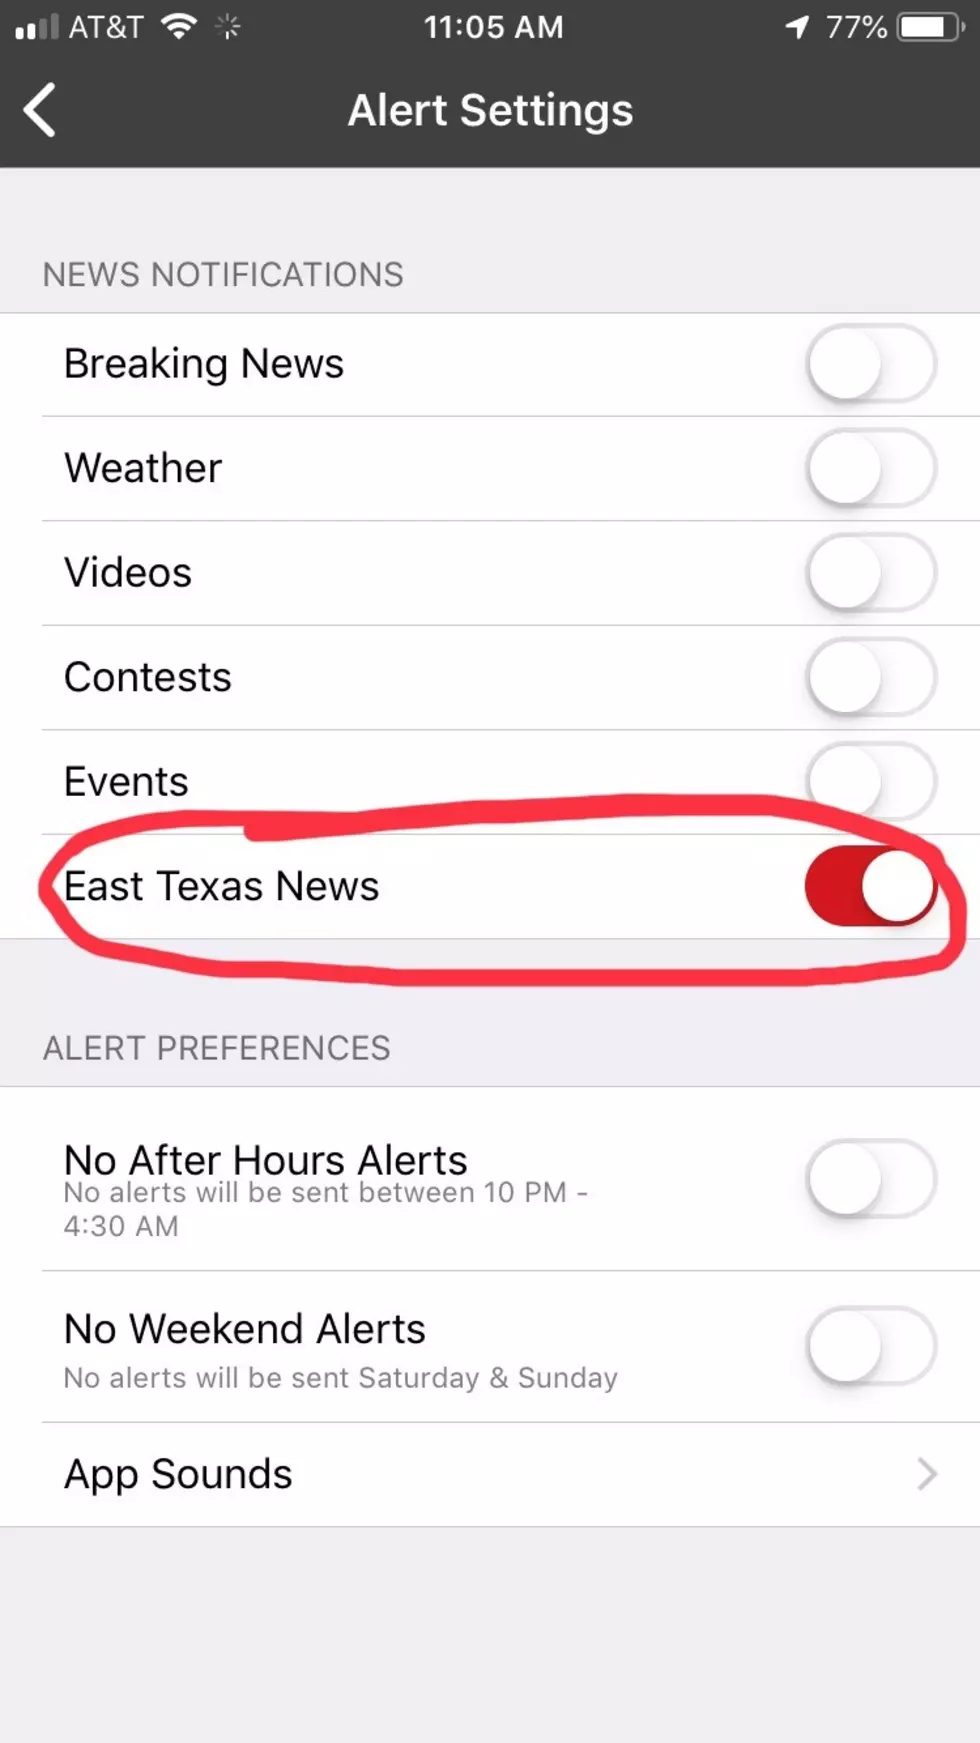 Check Out The Q107 App With An &#8216;East Texas News&#8217; Alert Feature